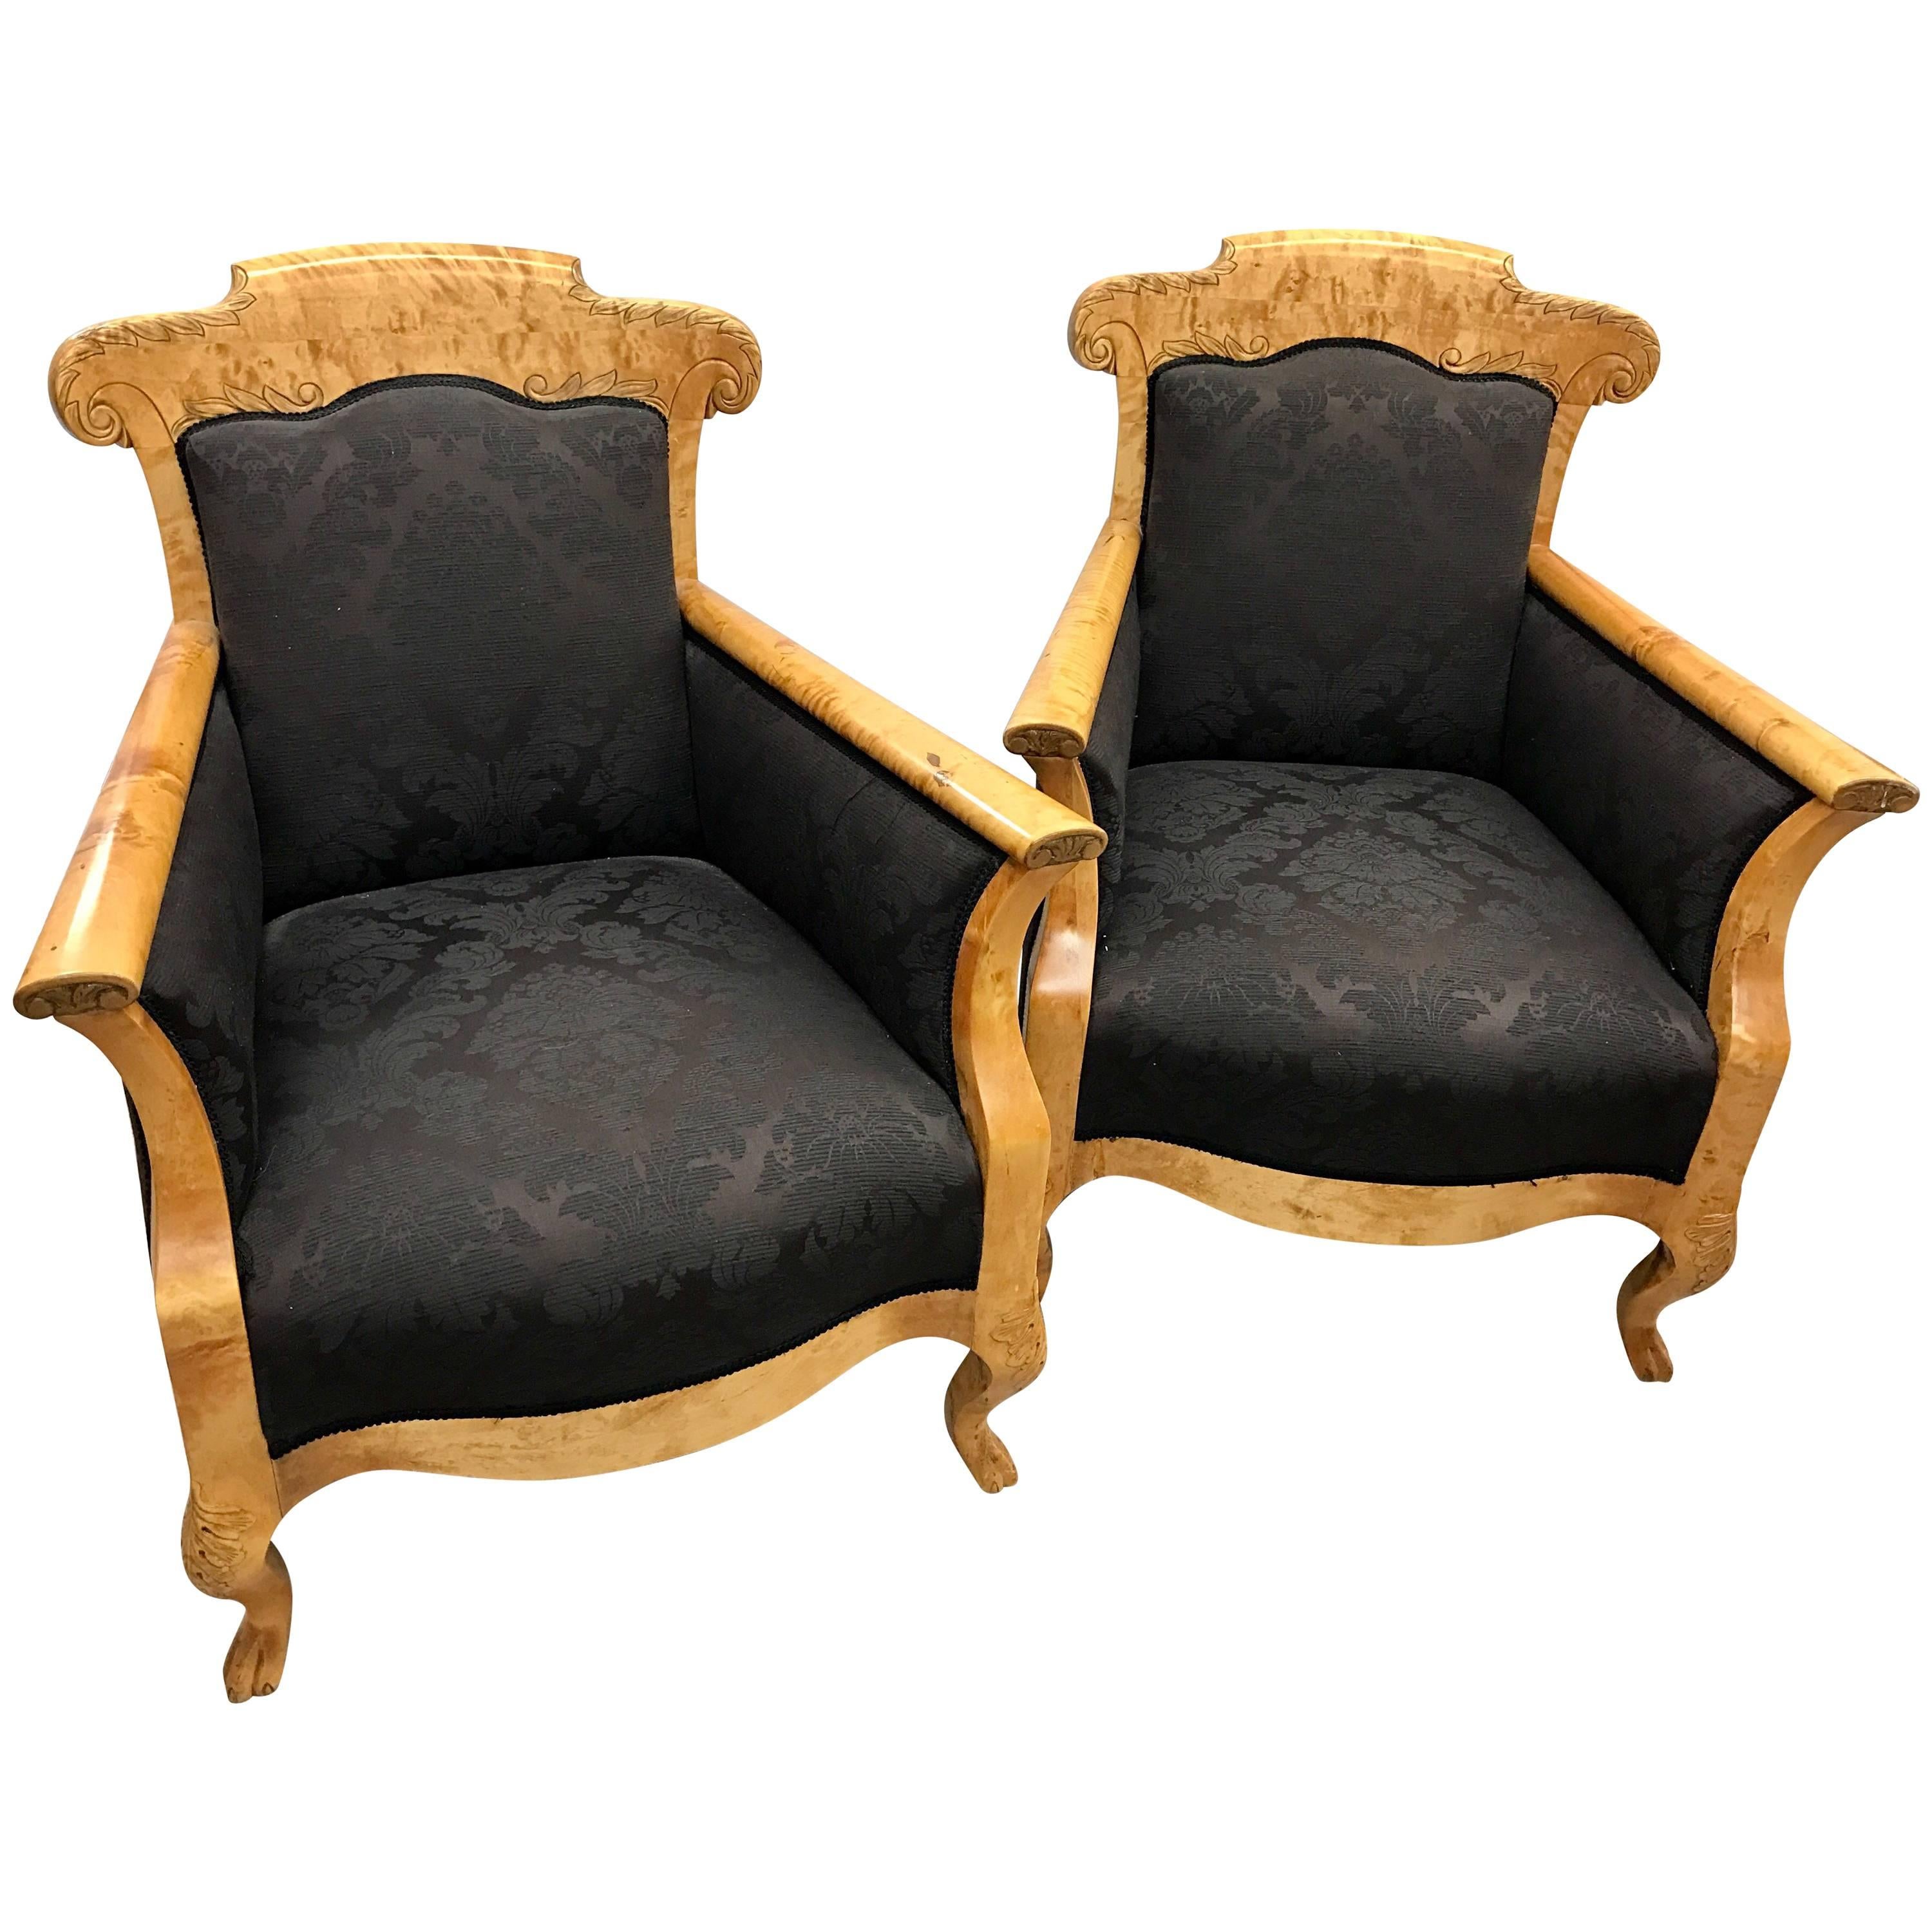 Pair of 19th Century Oversized Carved Biedermeier Bergere Chairs